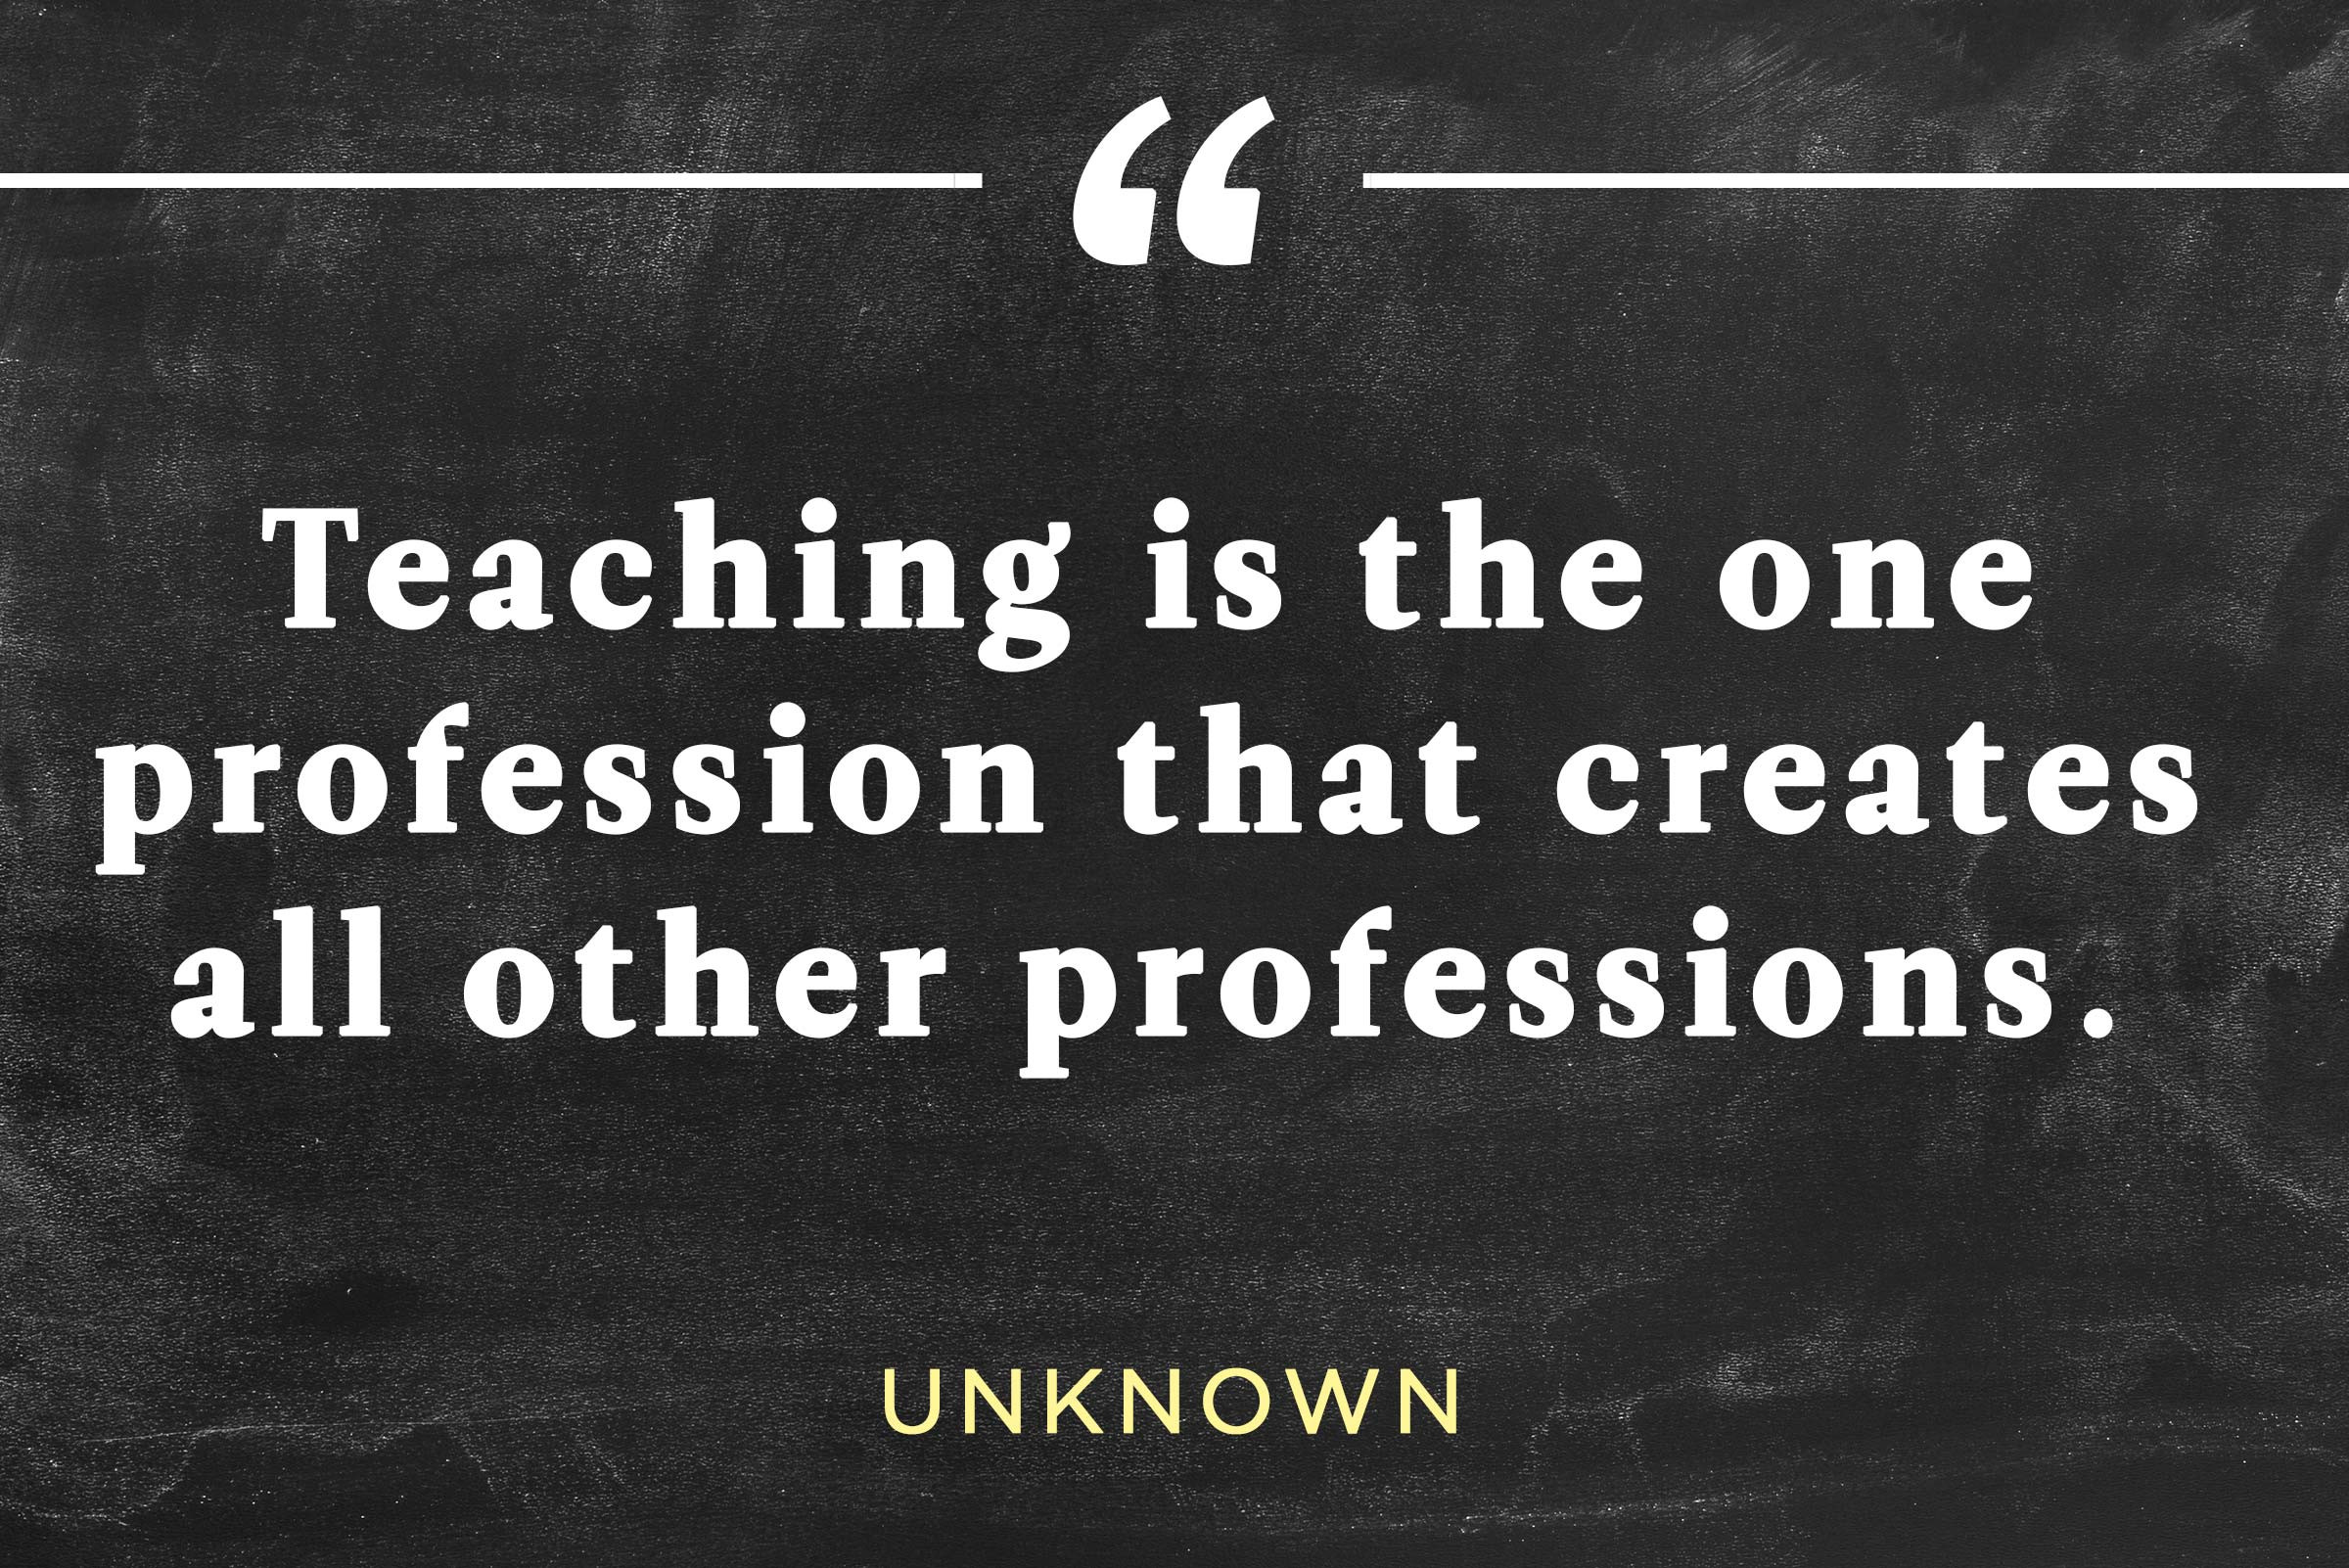 Inspirational Quotes About Teachers
 Inspirational Teacher Quotes